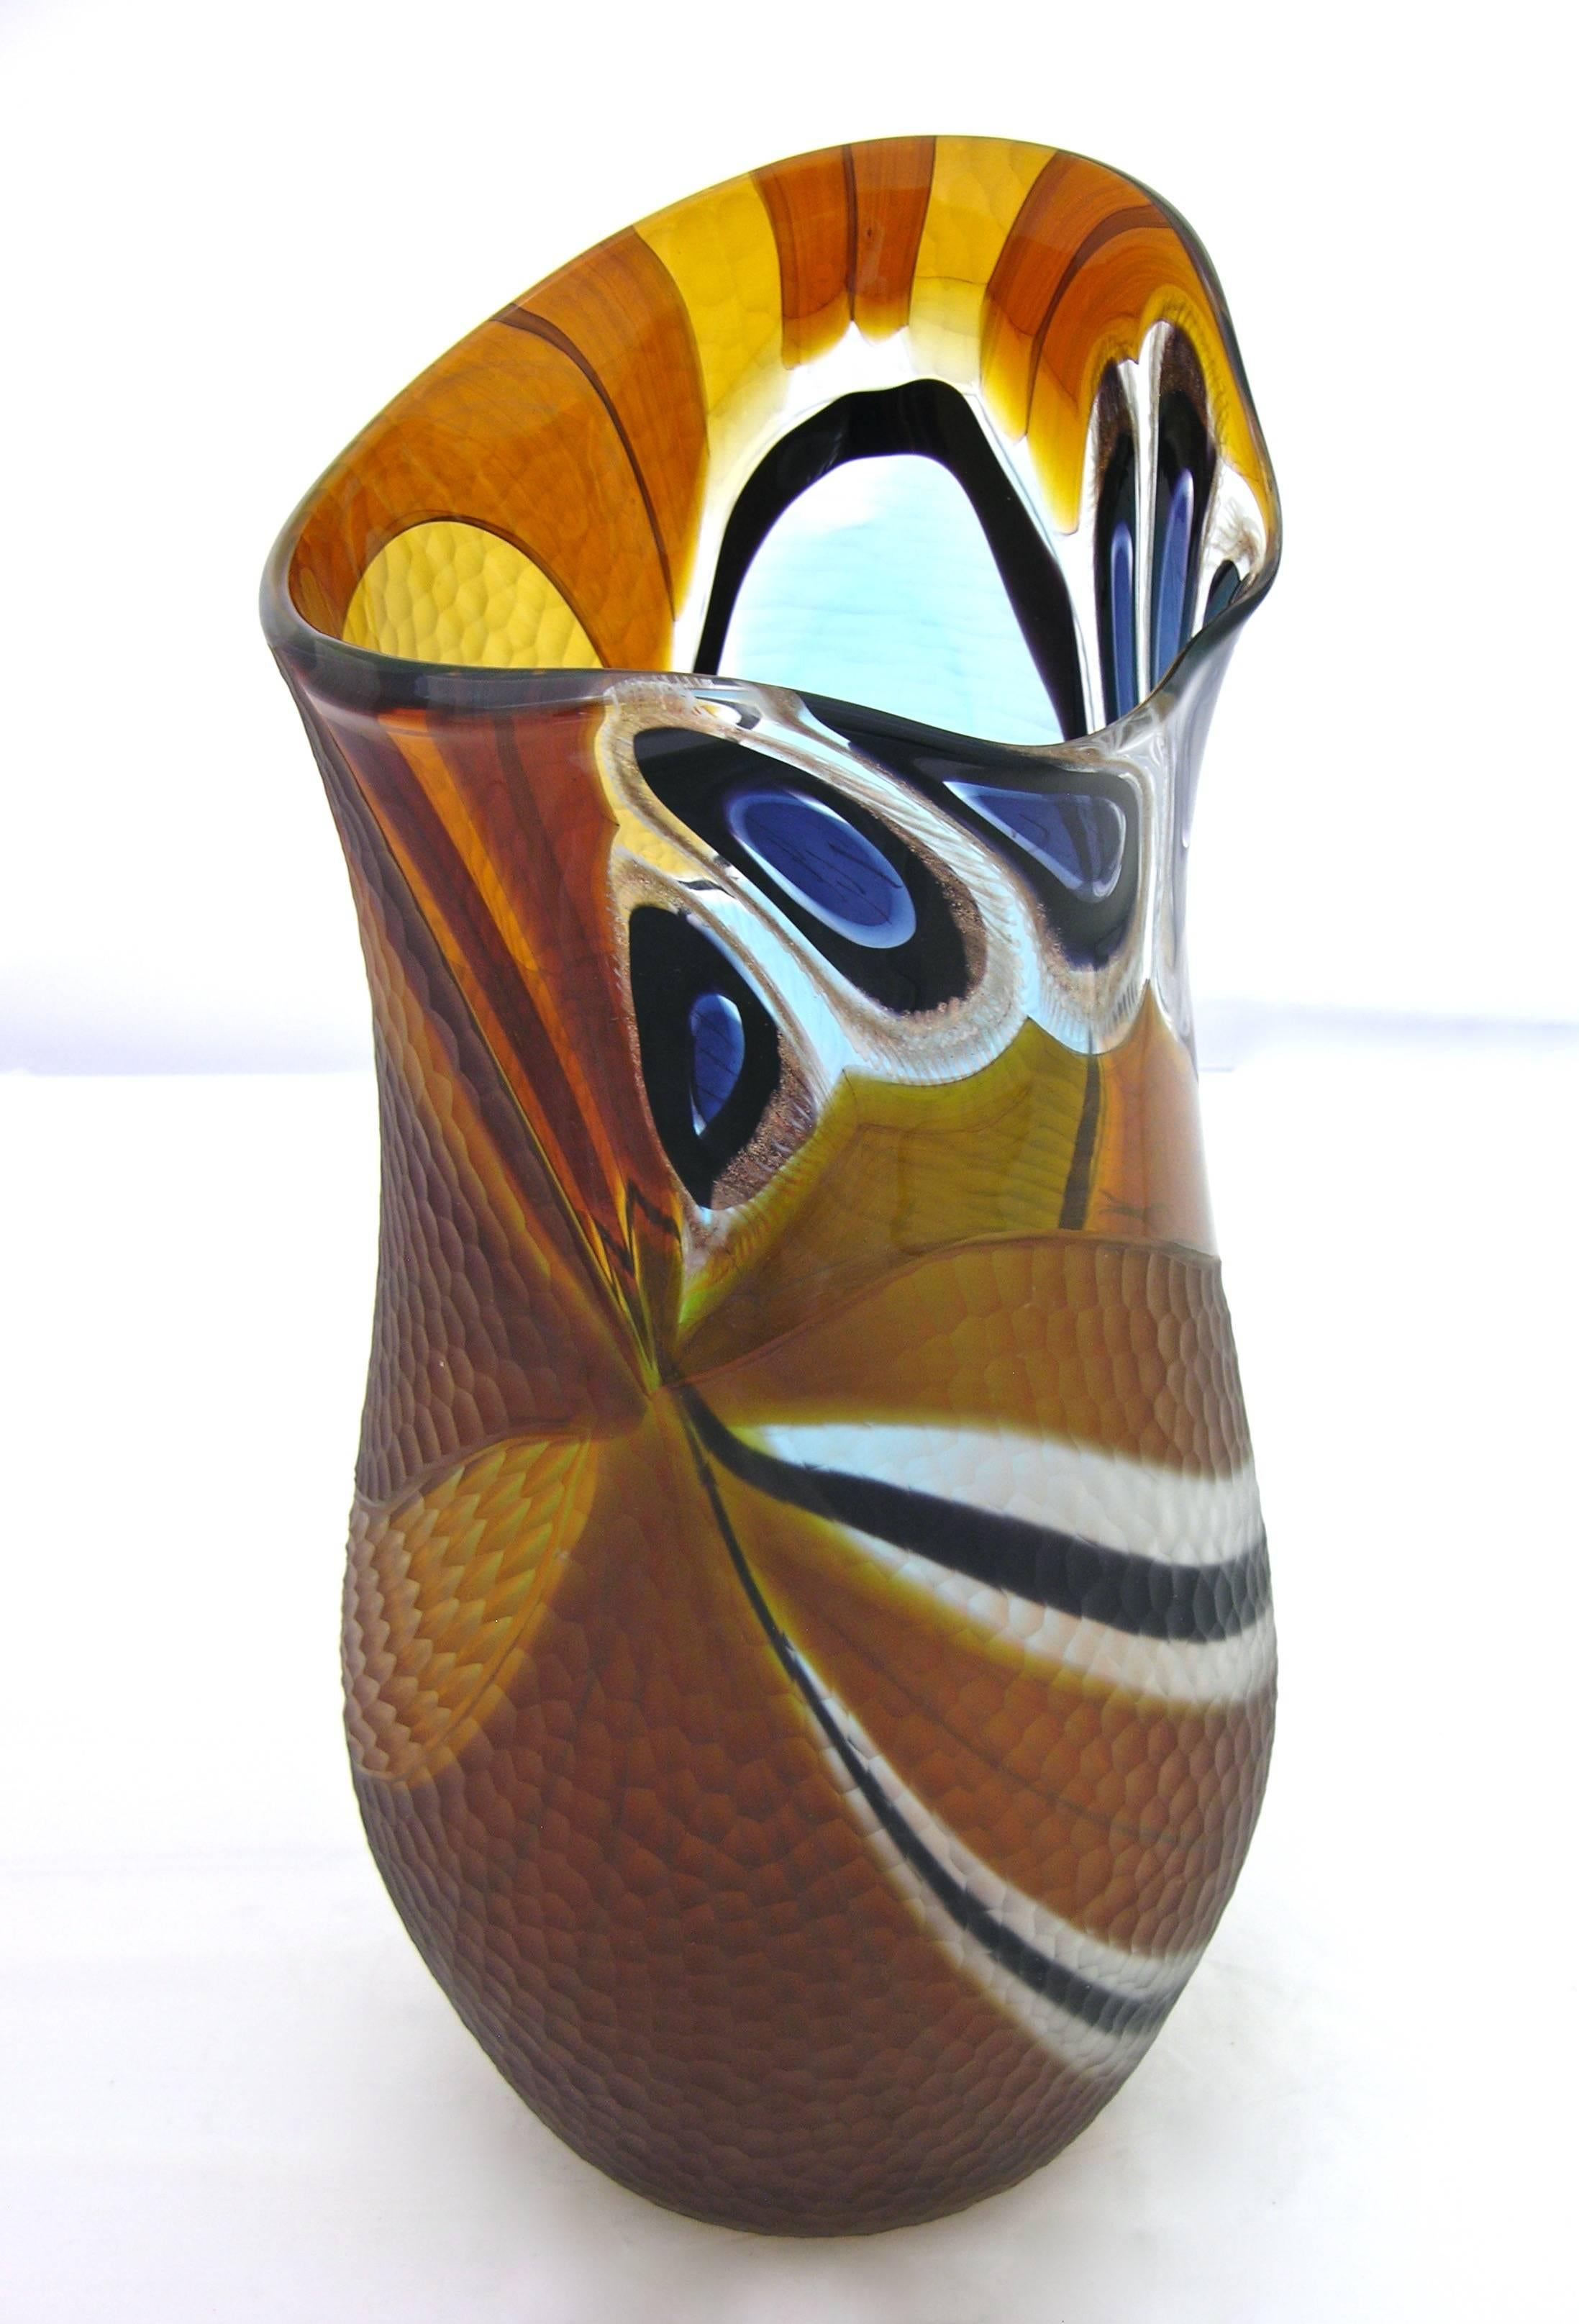 Organic Modern Cenedese 1990s Colorful Murano Glass Vase with Blue Black and Gold Murrine